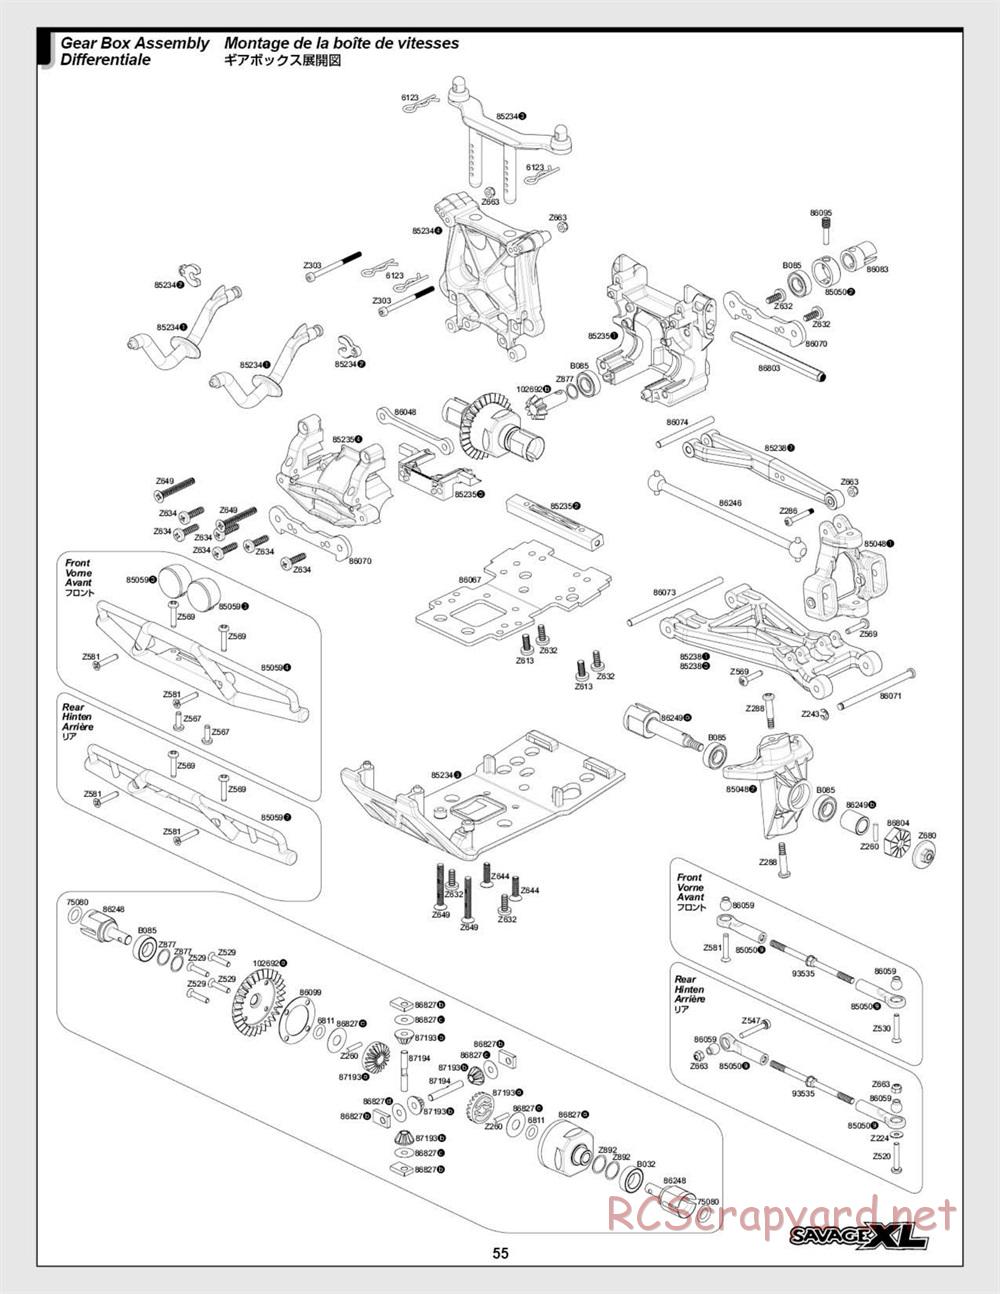 HPI - Savage XL 5.9 - Exploded View - Page 55